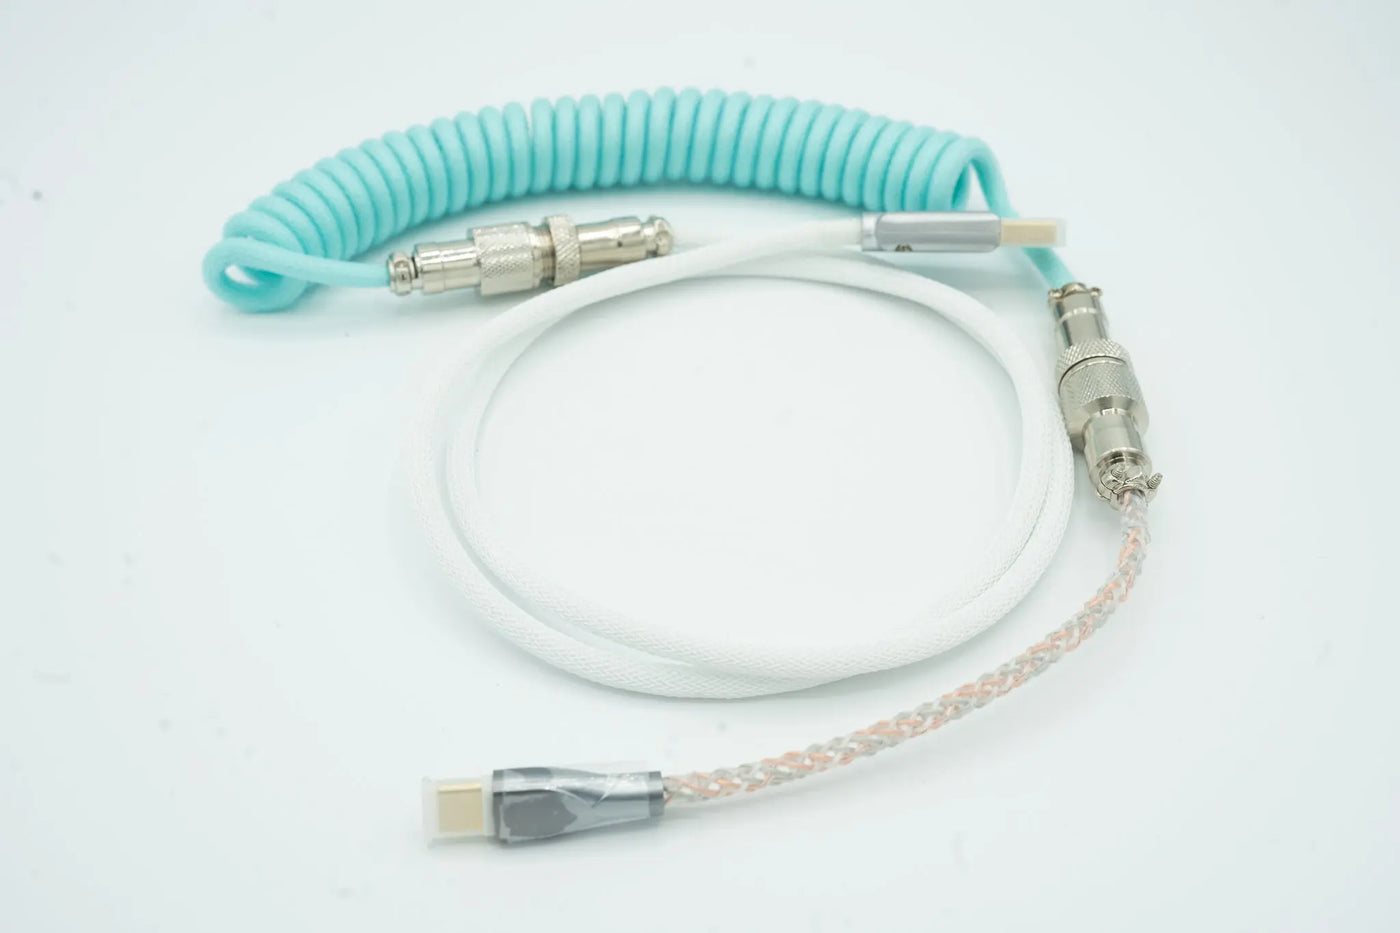 Cyan and White Light up Custom Coiled Type C USB Cable for Keyboard Vyral